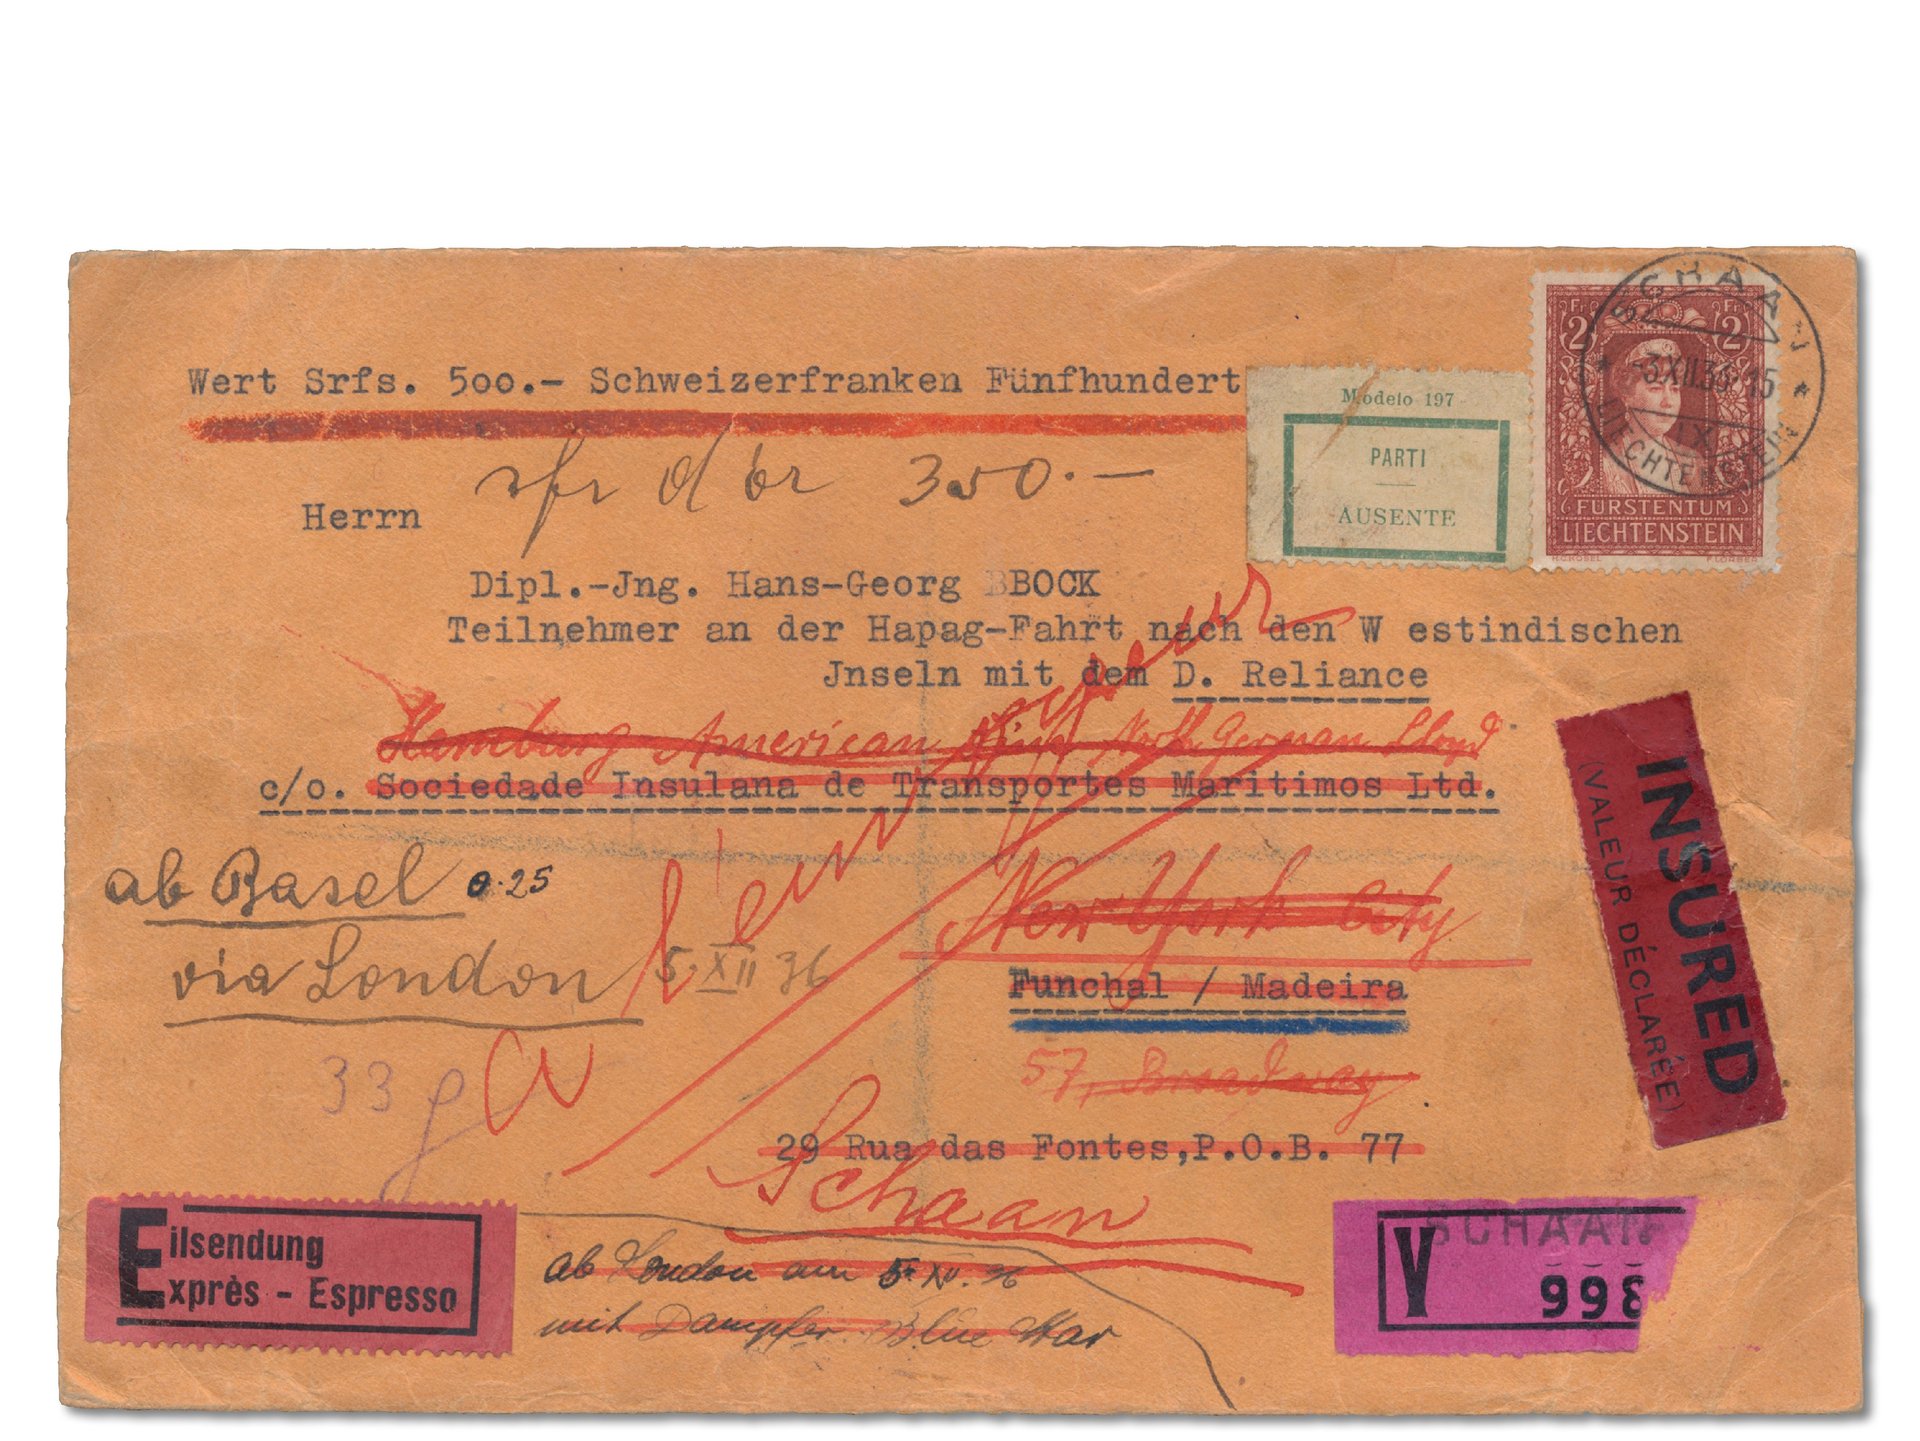 Liechtenstein insured letter of 1933 with Princess Elsa 2 Francs as single franking with many postmarks, endorsements and sticker labels